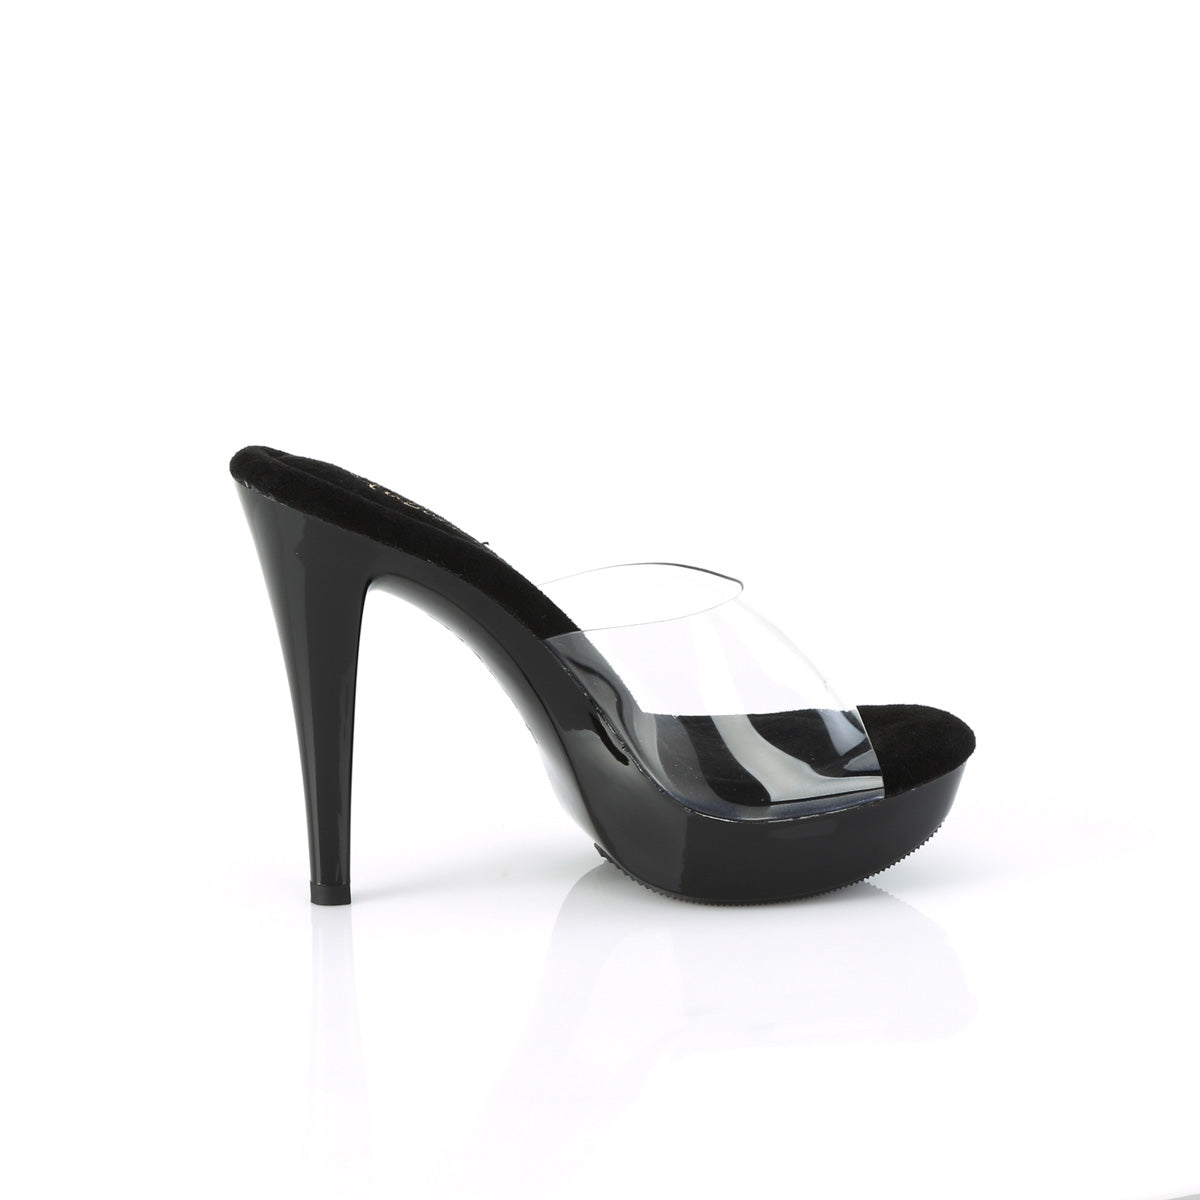 COCKTAIL-501 Fabulicious Clear/Black Shoes [Sexy Shoes]